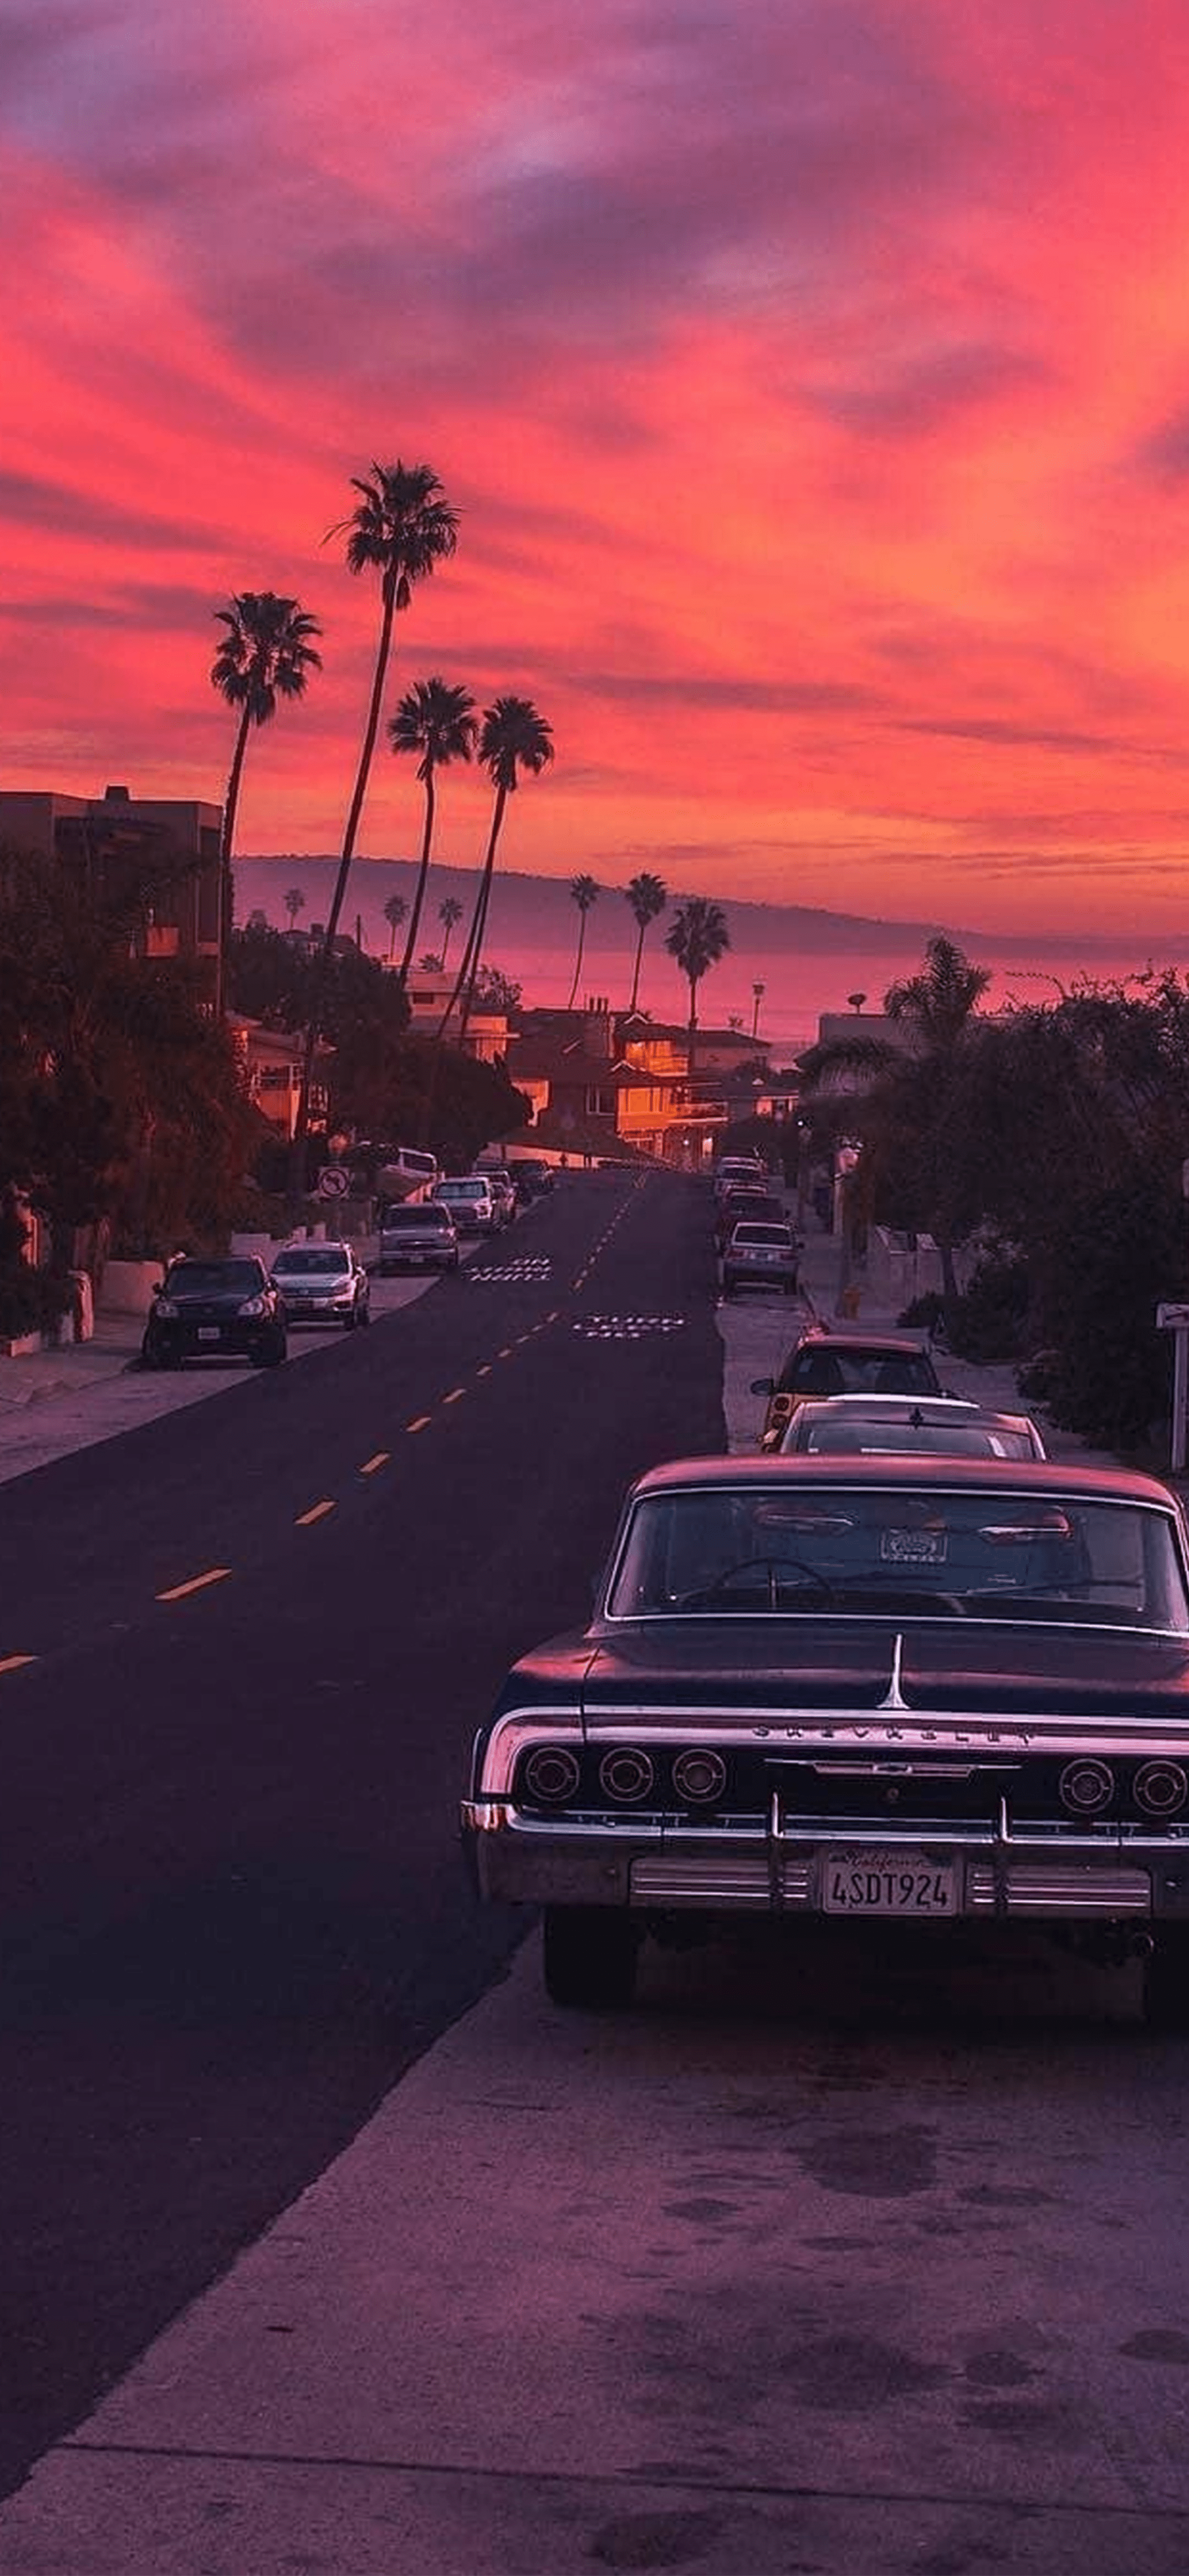 A vintage car parked on the side of the road with a sunset in the background. - Cars